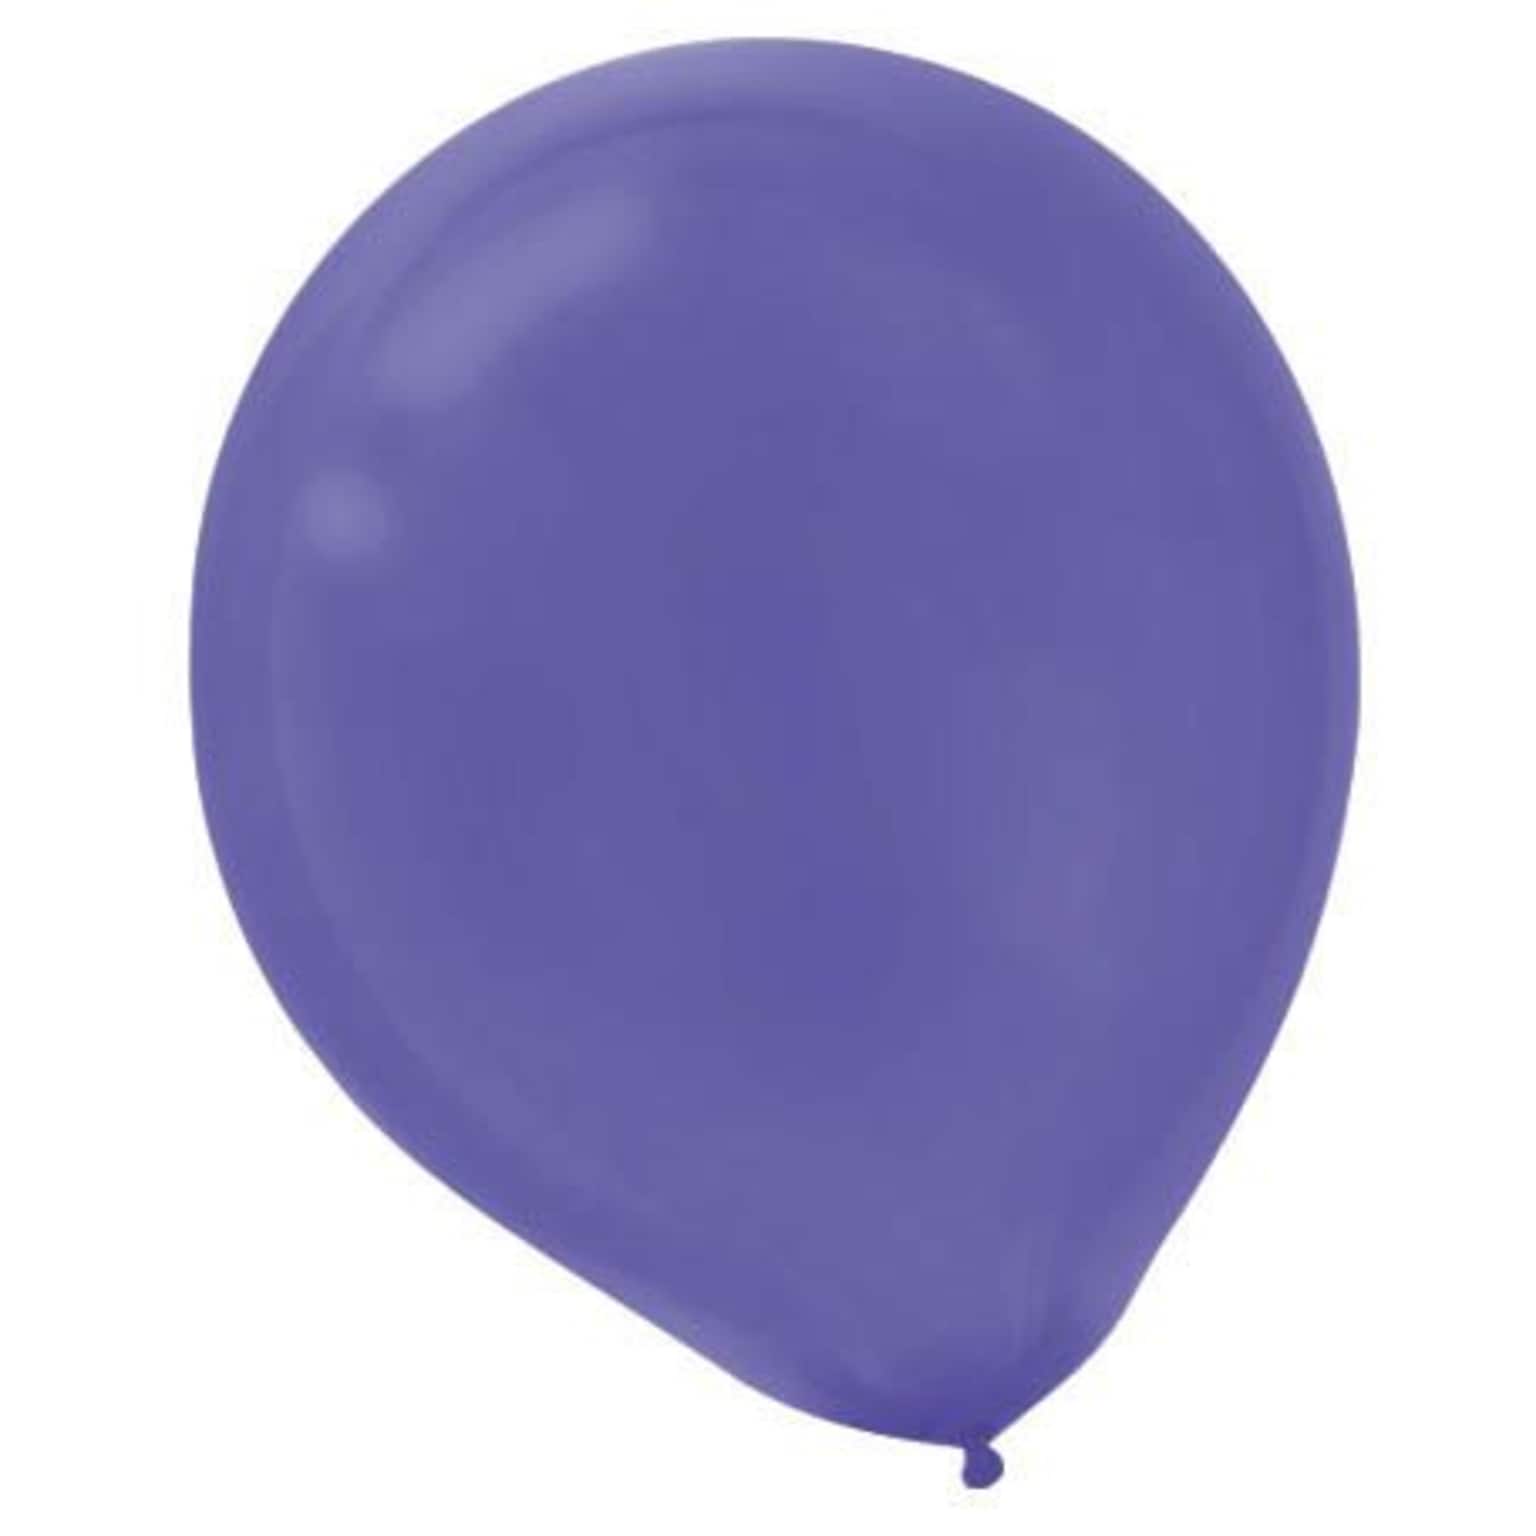 Amscan Solid Color Packaged Latex Balloons, 12, New Purple, 4/Pack, 72 Per Pack (113250.106)